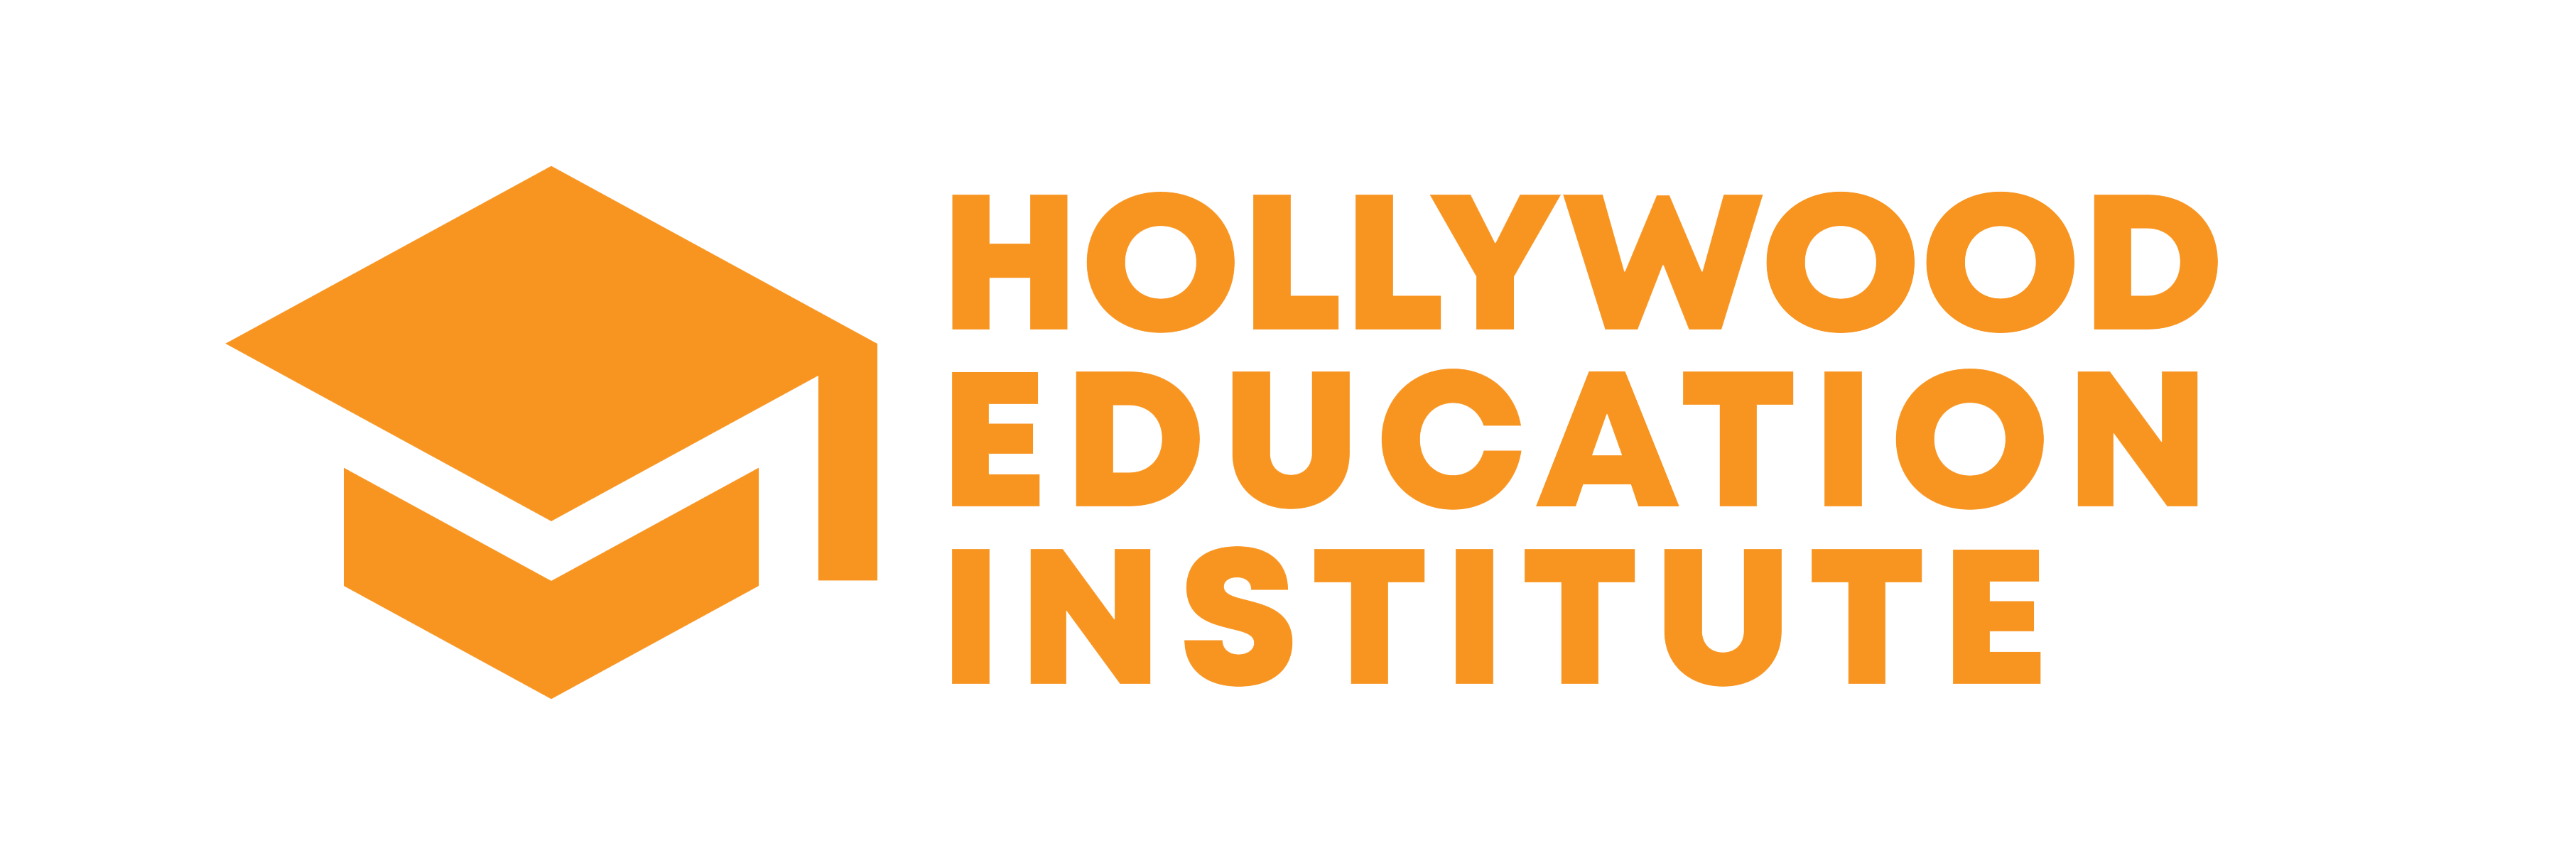 Hollywood Education Institute